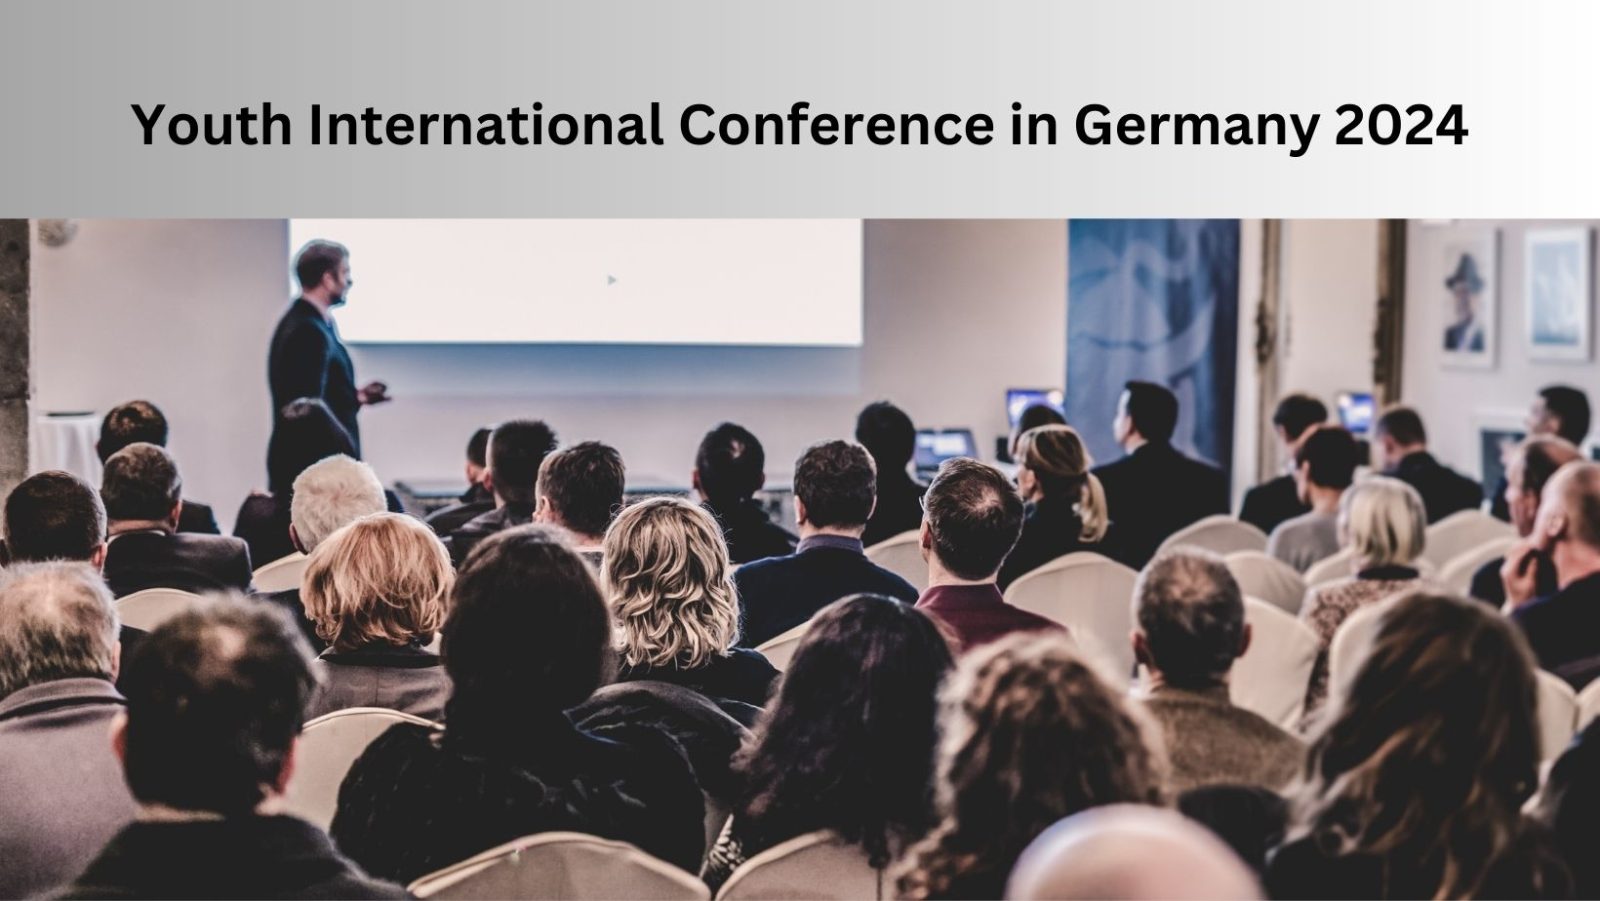 Youth International Conference in Germany 2024